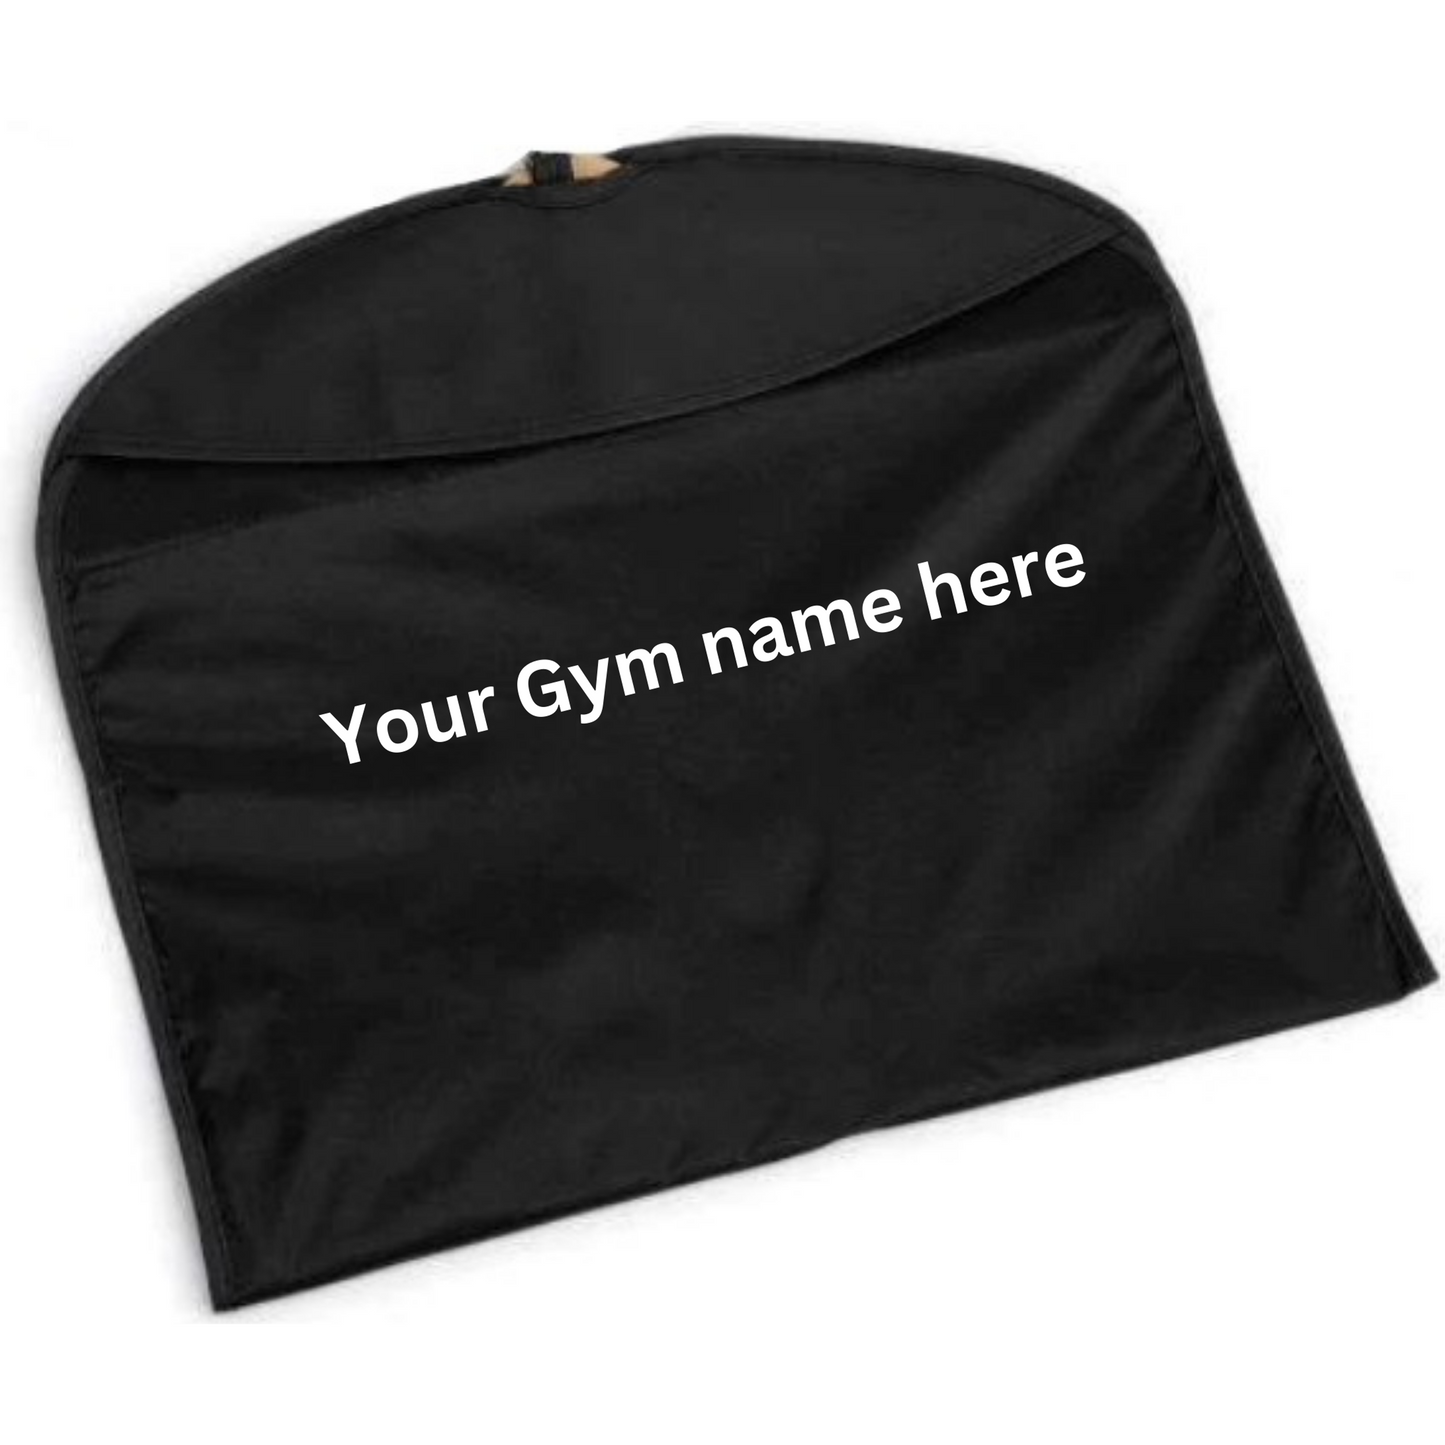 Our personalised gymnastics leotards bag is perfect for every gymnast, offering a stylish and functional solution for carrying all your essential gear. Complete with your name and club embroidered, it ensures your belongings are organised and easily identifiable. Crafted with durable materials, it features spacious compartments for leotards, grips, and other equipment. Show off your club pride and stand out in the gym with this high-quality, personalised gymnastics accessory.